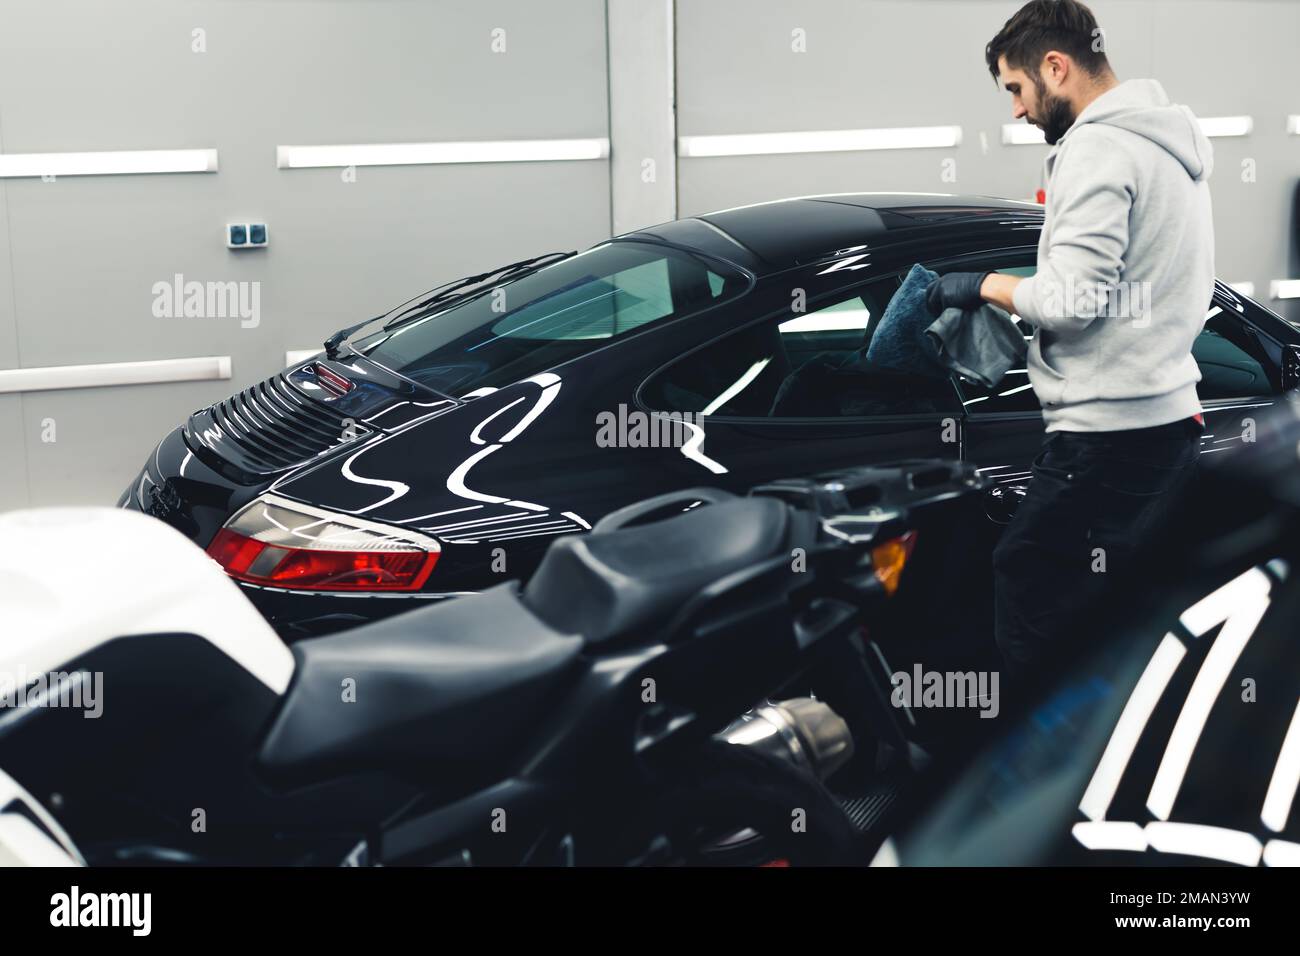 Ceramic paint protection. Man during car detailing. Process of applying ceramic coating onto black sports car with a microfiber cloth. High quality photo Stock Photo